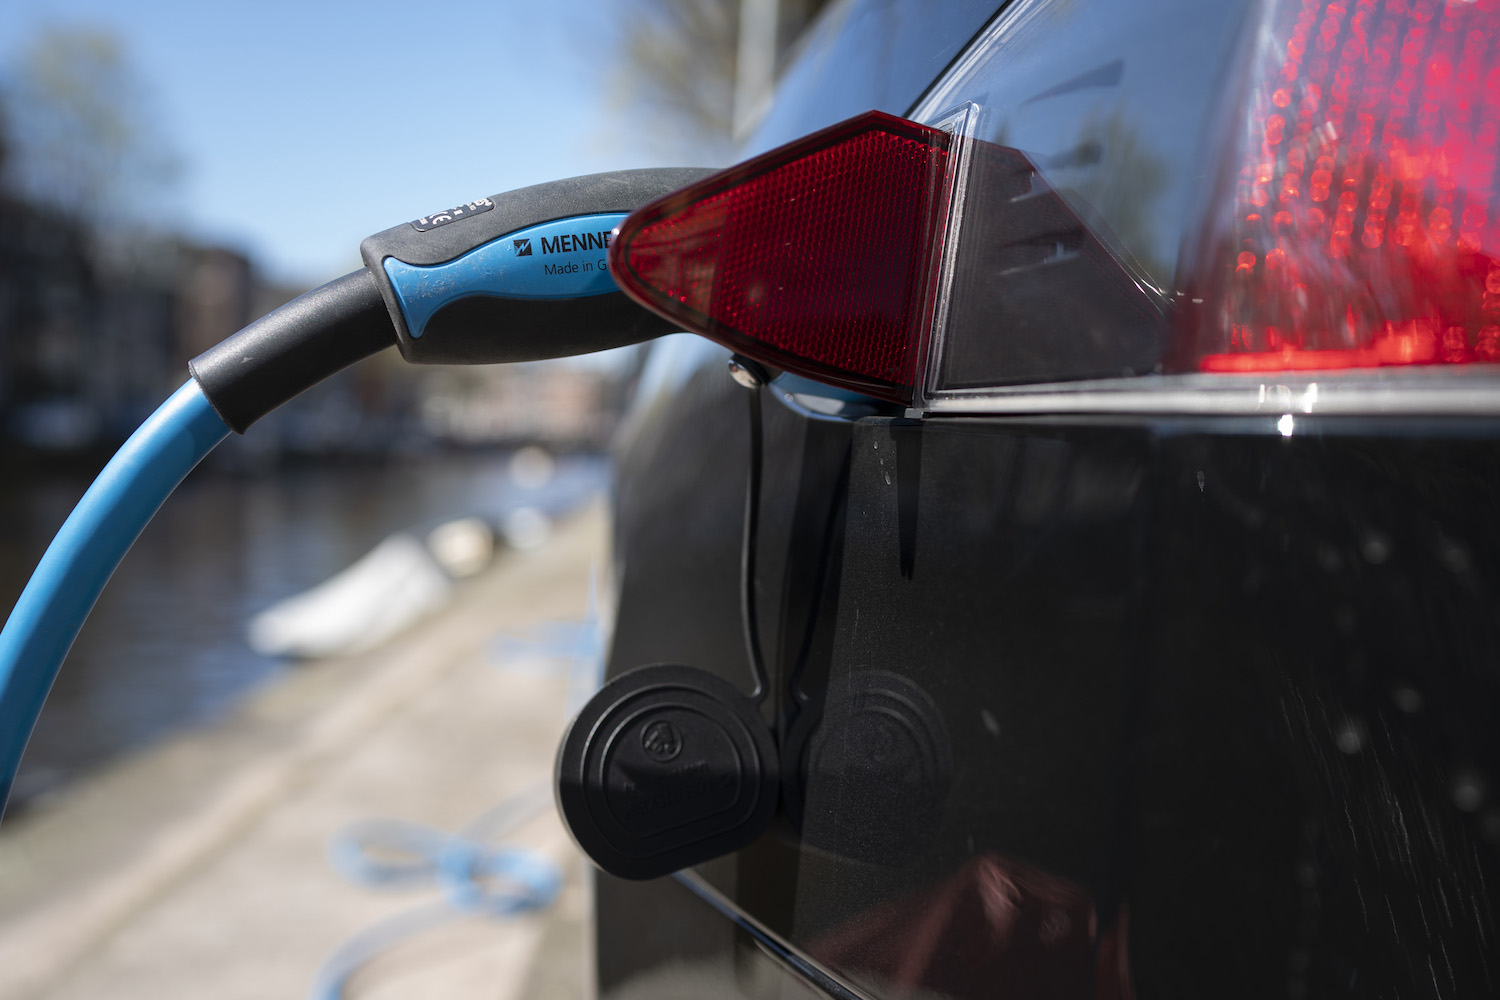 A blue aftermarket EV charging cable plugged into a Tesla's port, the electric car's black fender and tail light visible in the foreground.